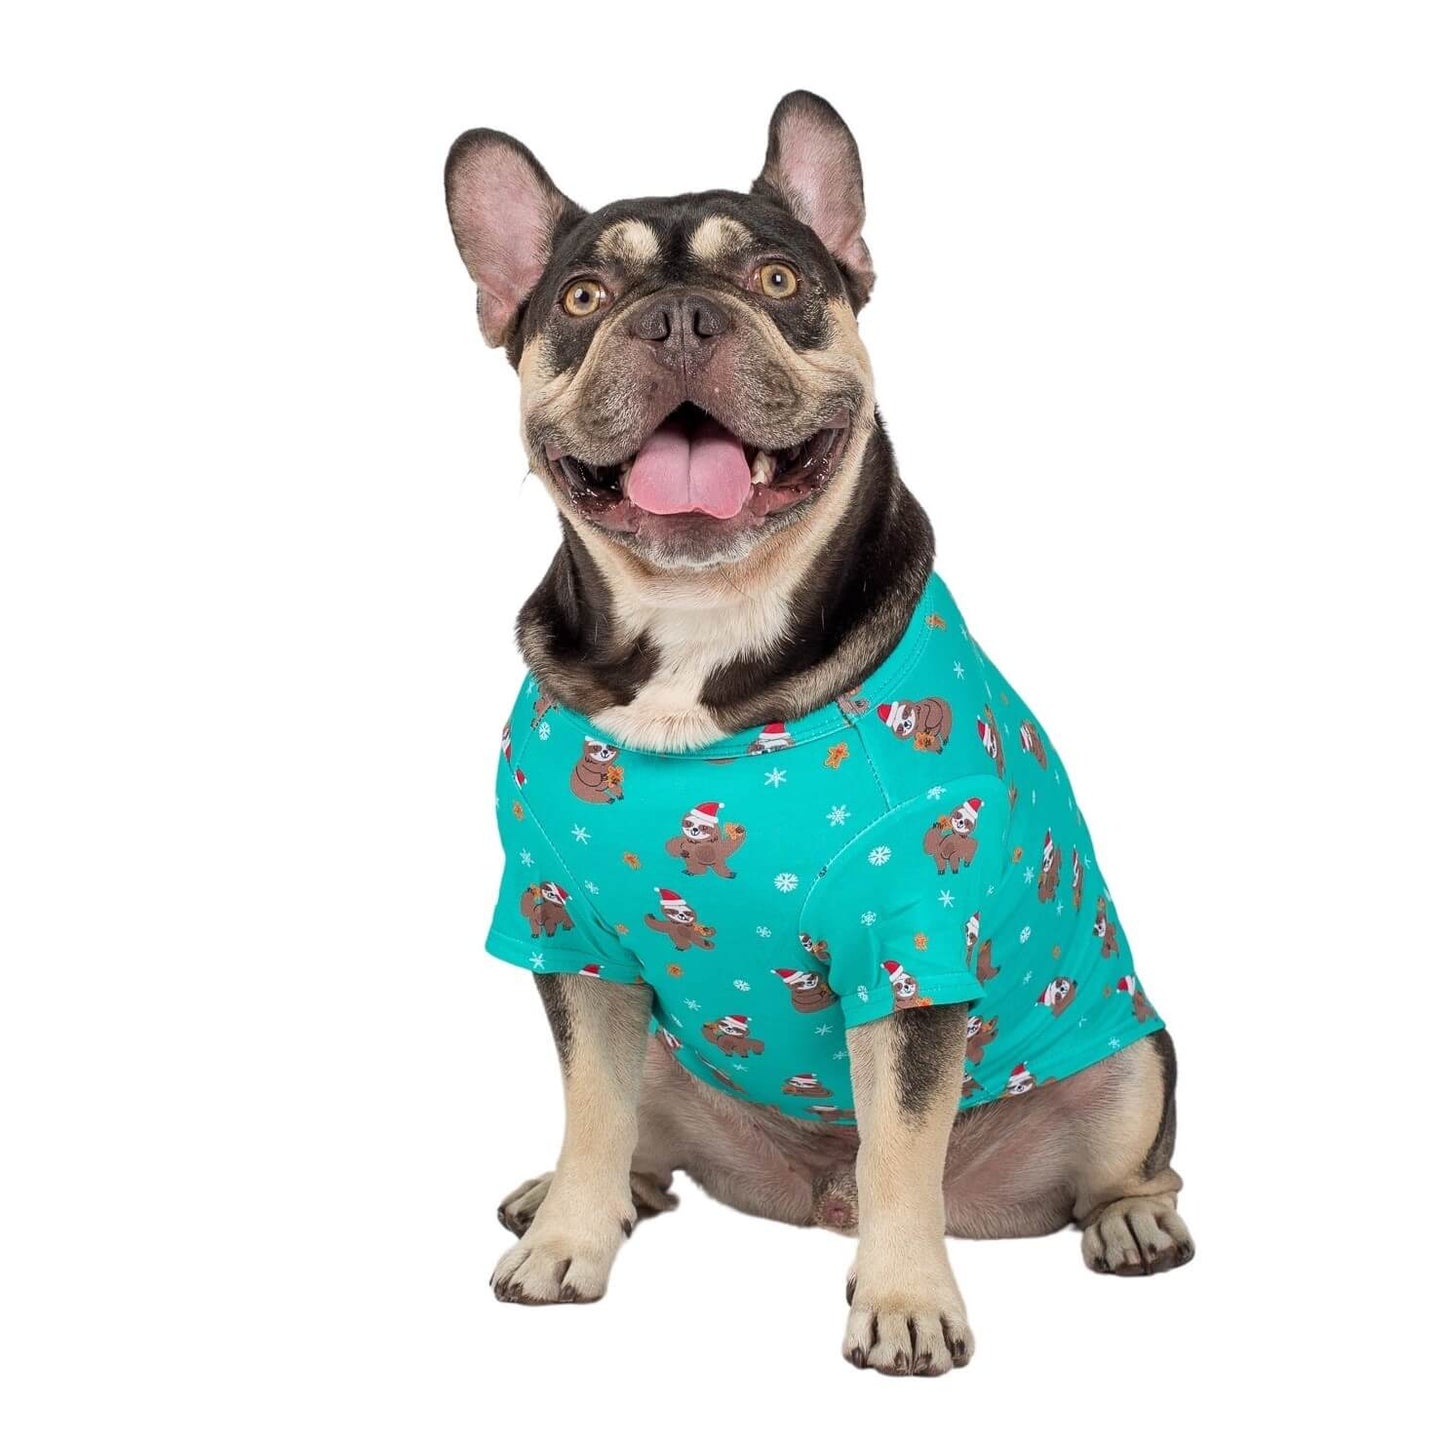 Fergus the French Bulldog wearing Vibrant Hounds Festive Sloths shirt for dogs. It is a green shirt with sloths wearing santa hats, and snow flakes.